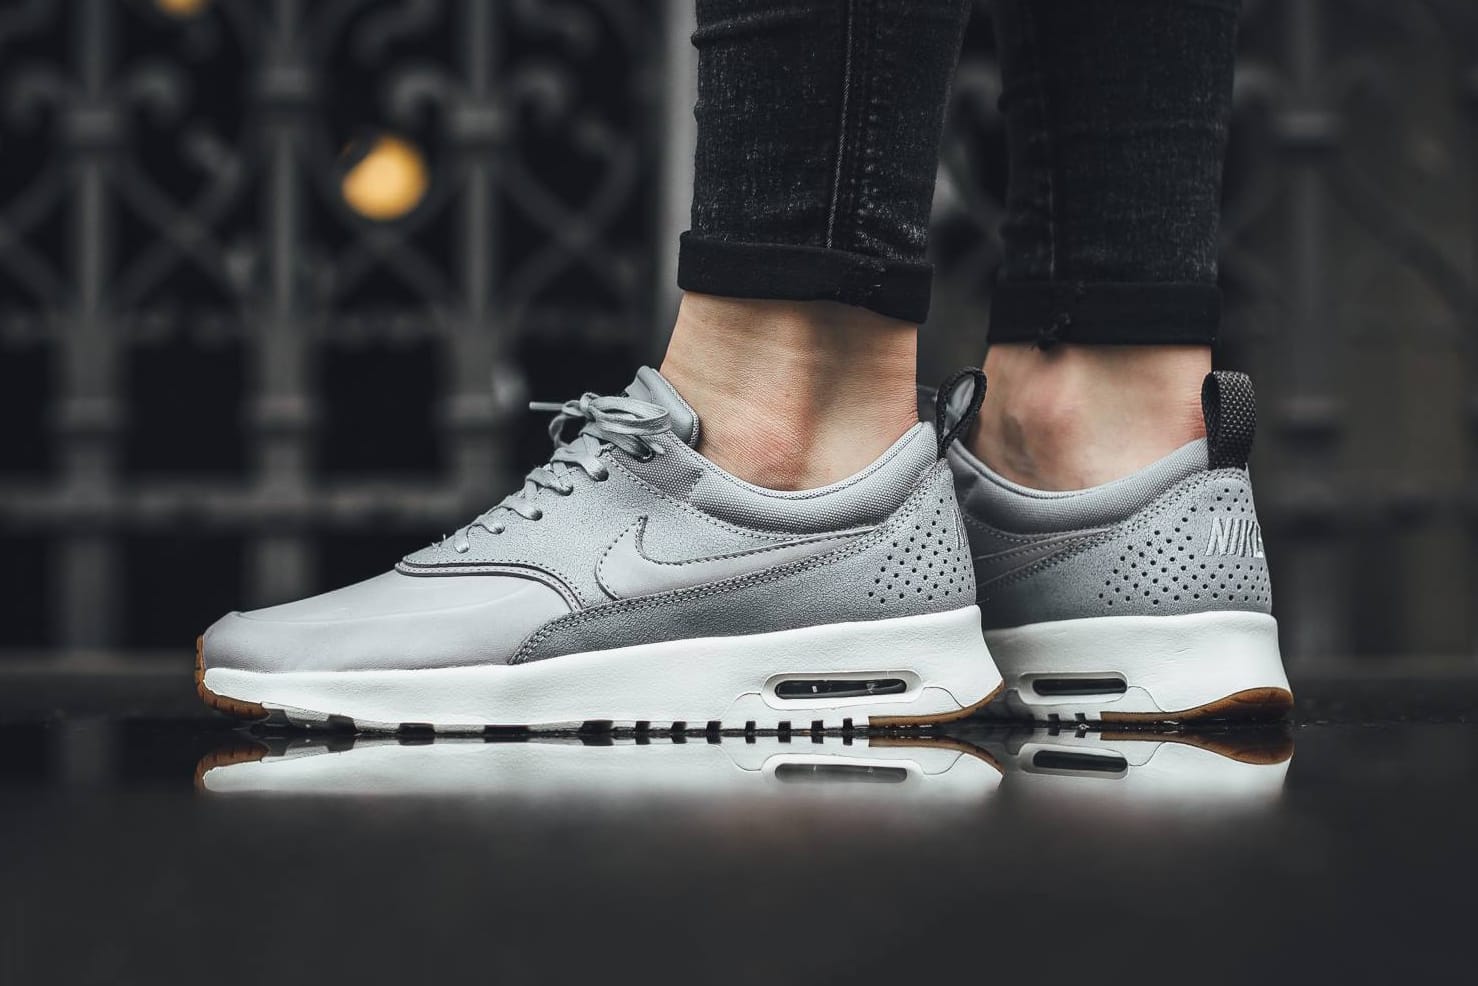 nike air max thea black and wolf grey